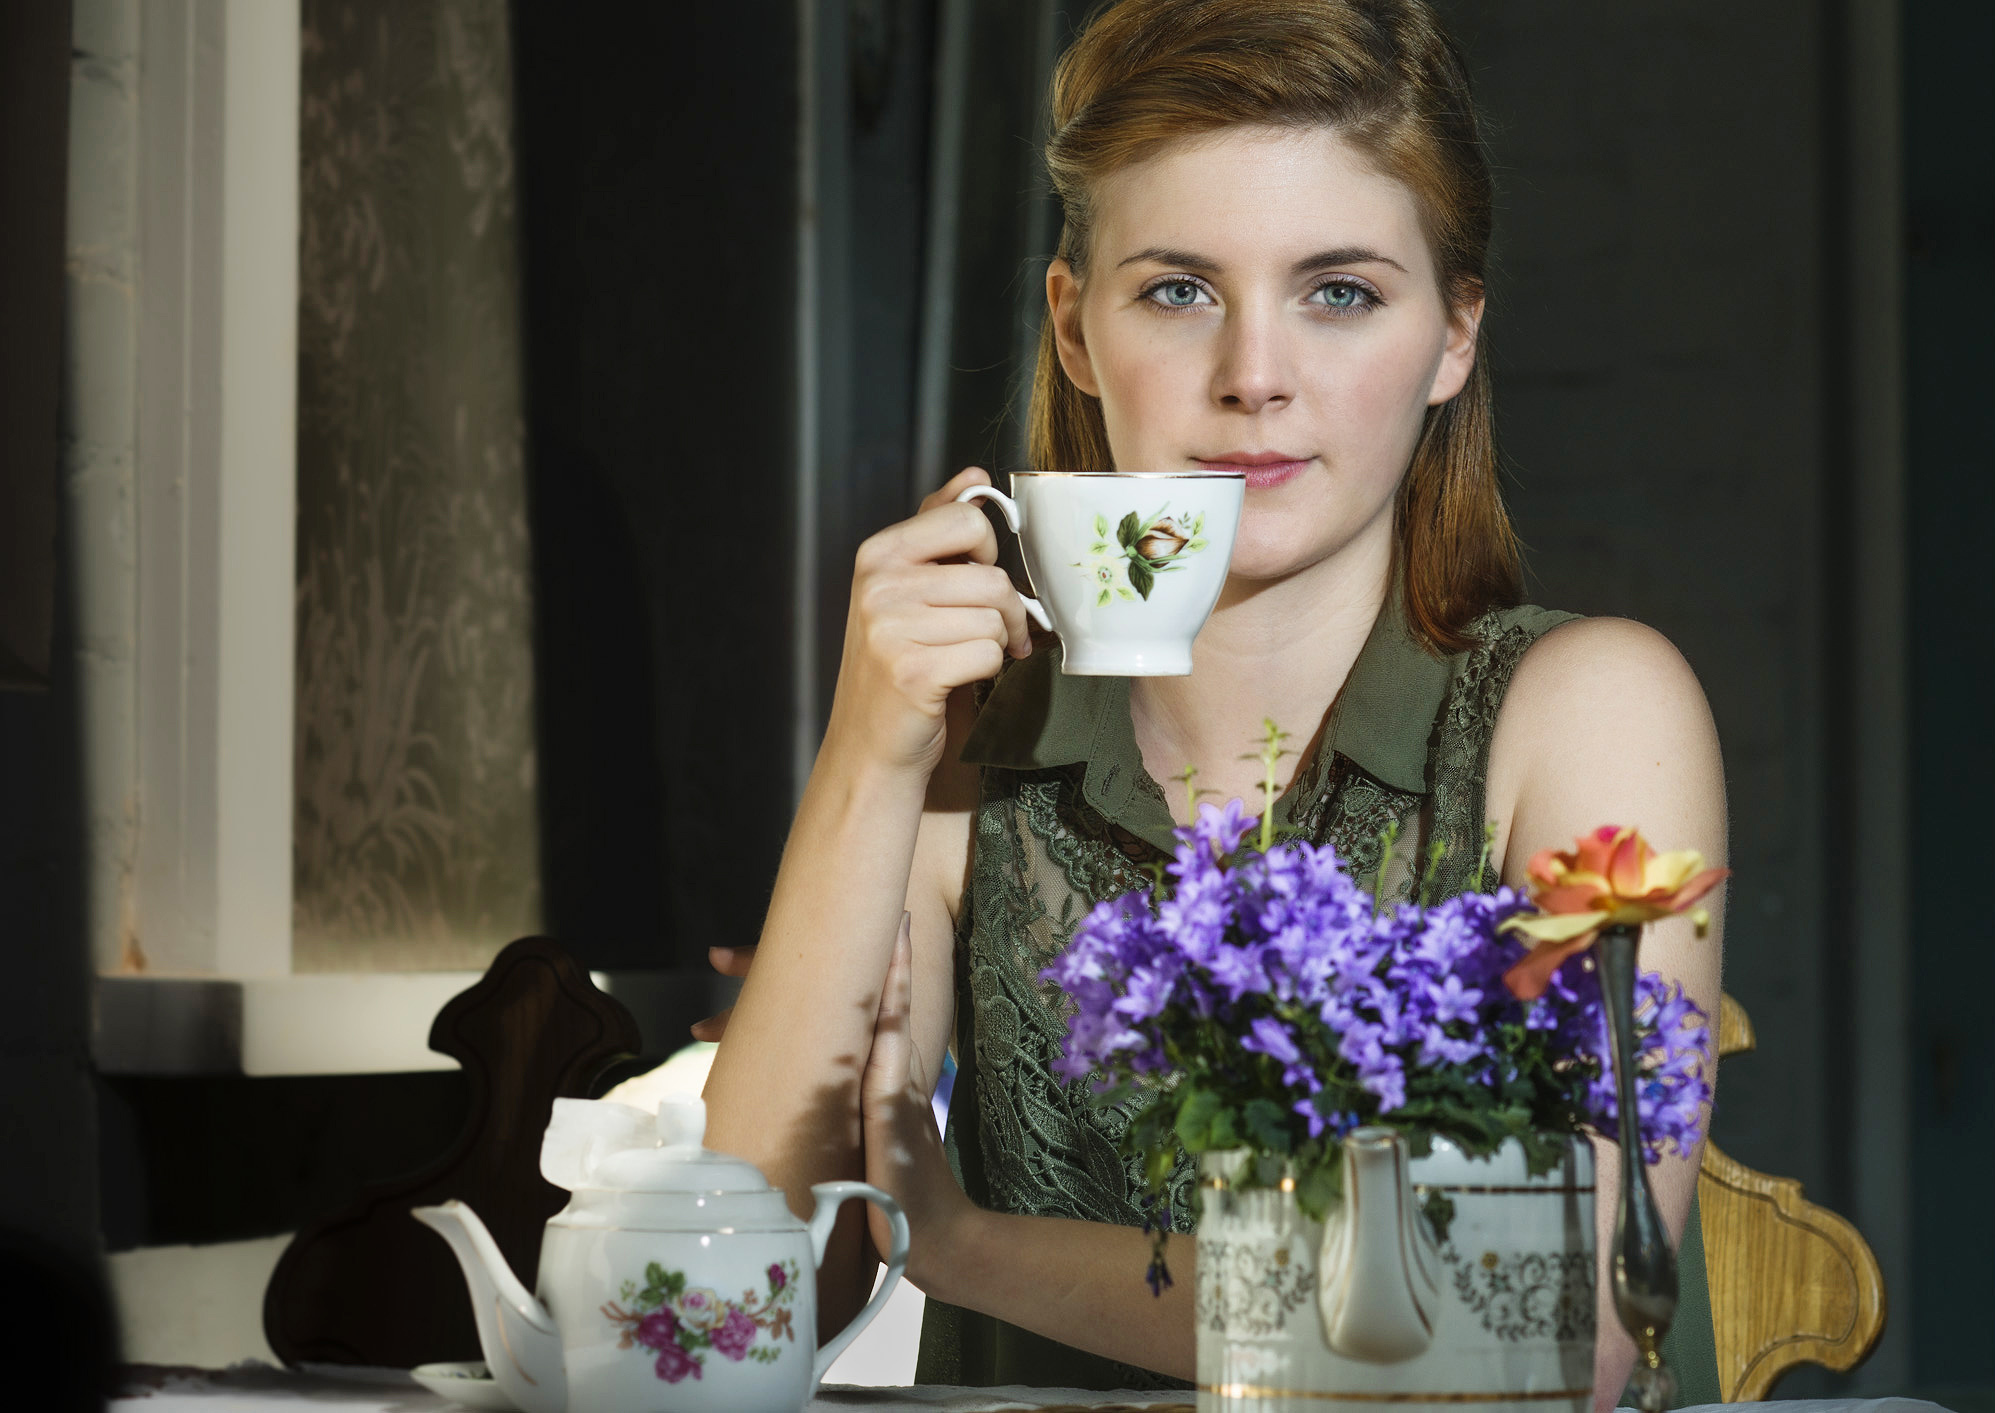 Colour photographic portrait of female drinking tea looking into camera.